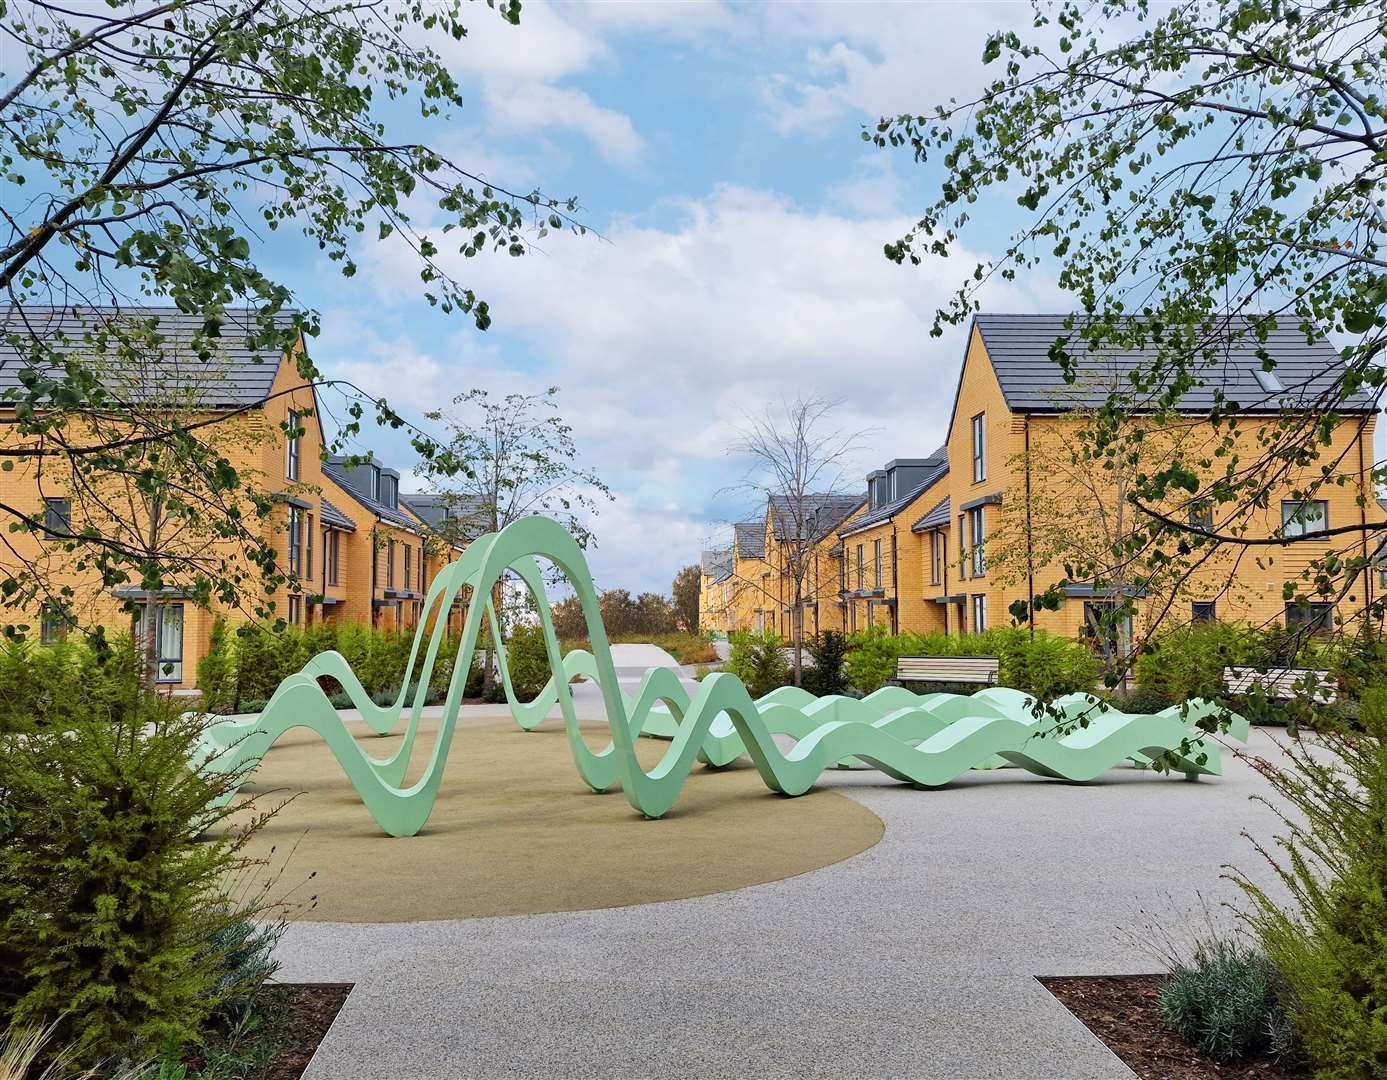 New public artwork has been installed on the site of a bear pit at Cable Wharf in Northfleet. Photo: Keepmoat Homes/Umpf